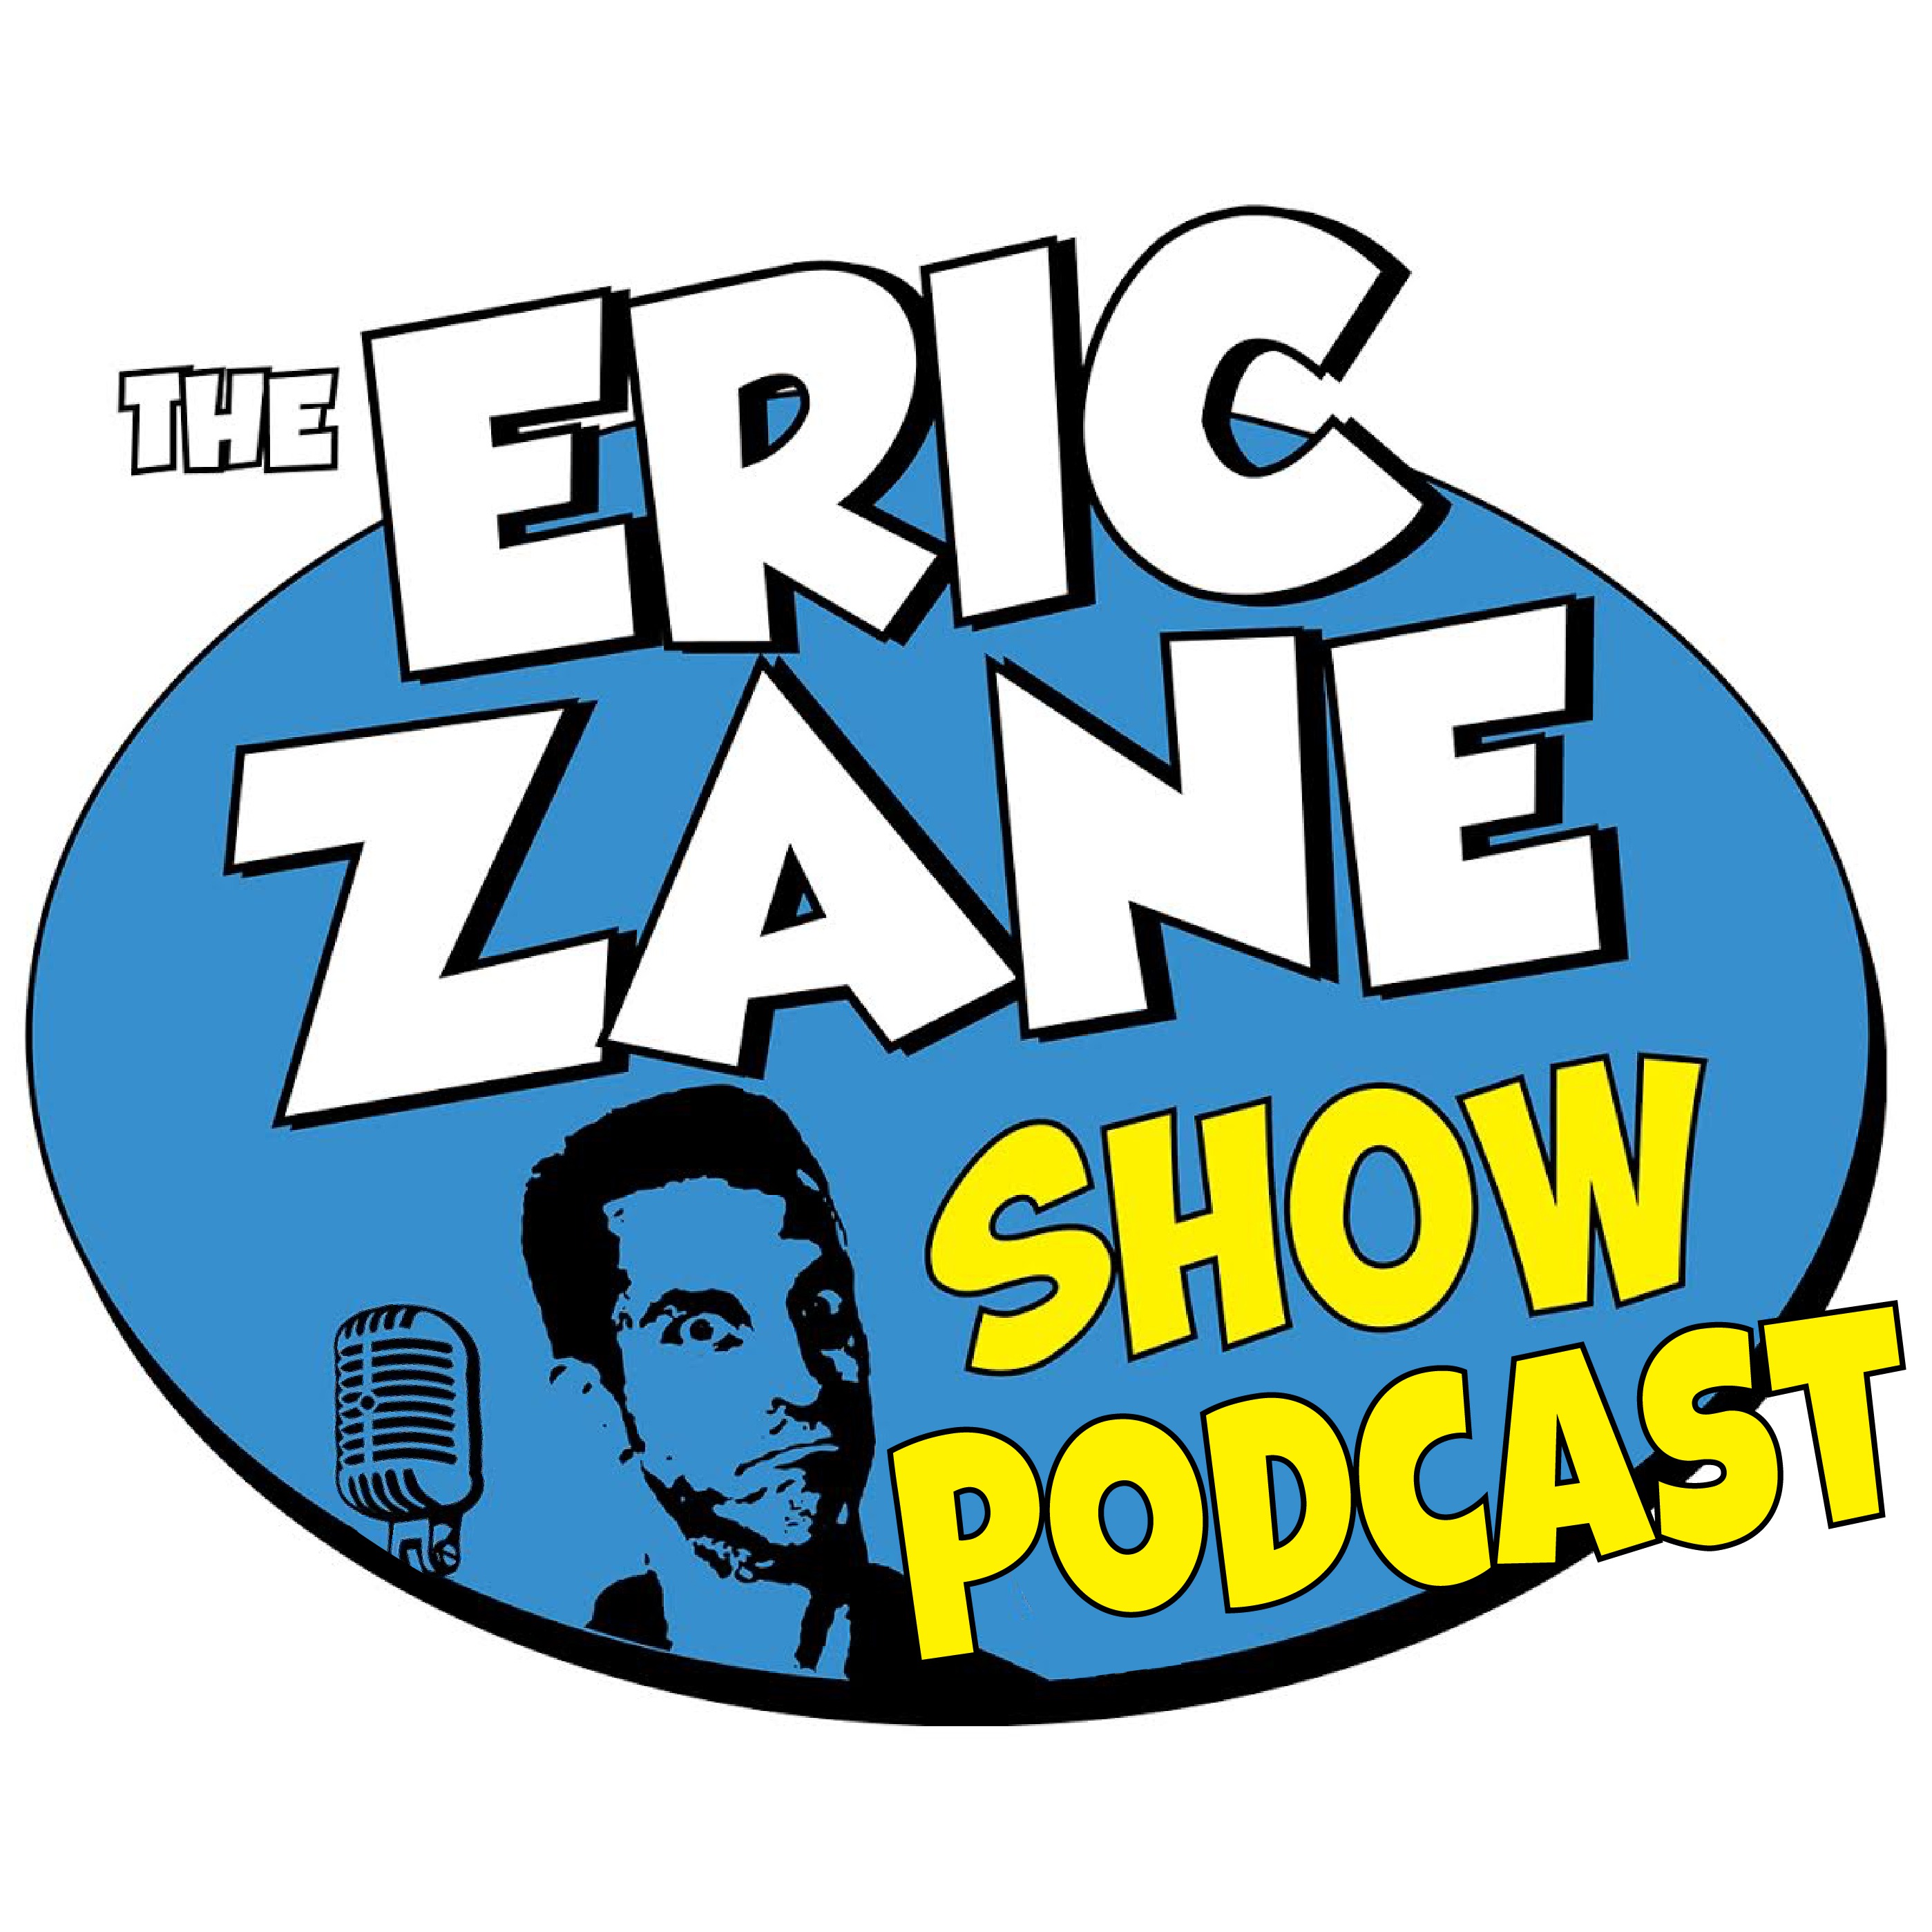 Eric Zane Show Podcast 865 Tony Dow (Wally from Leave it to Beaver) is not quite dead yet.